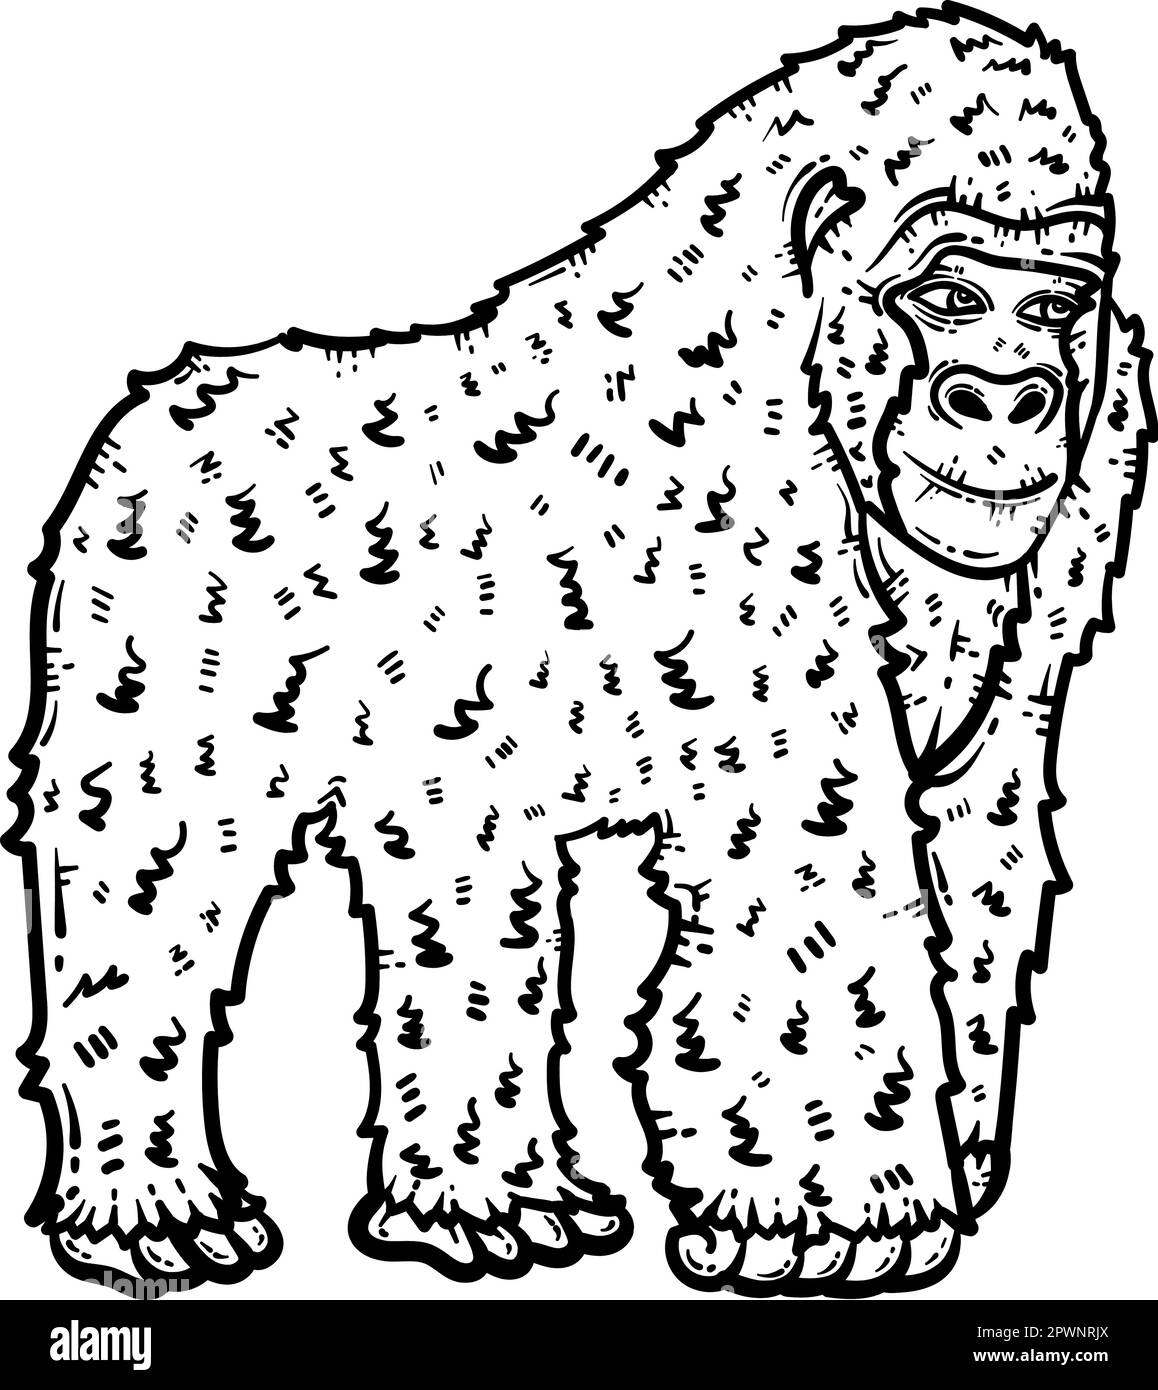 Gorilla Animal Coloring Page for Adults Stock Vector